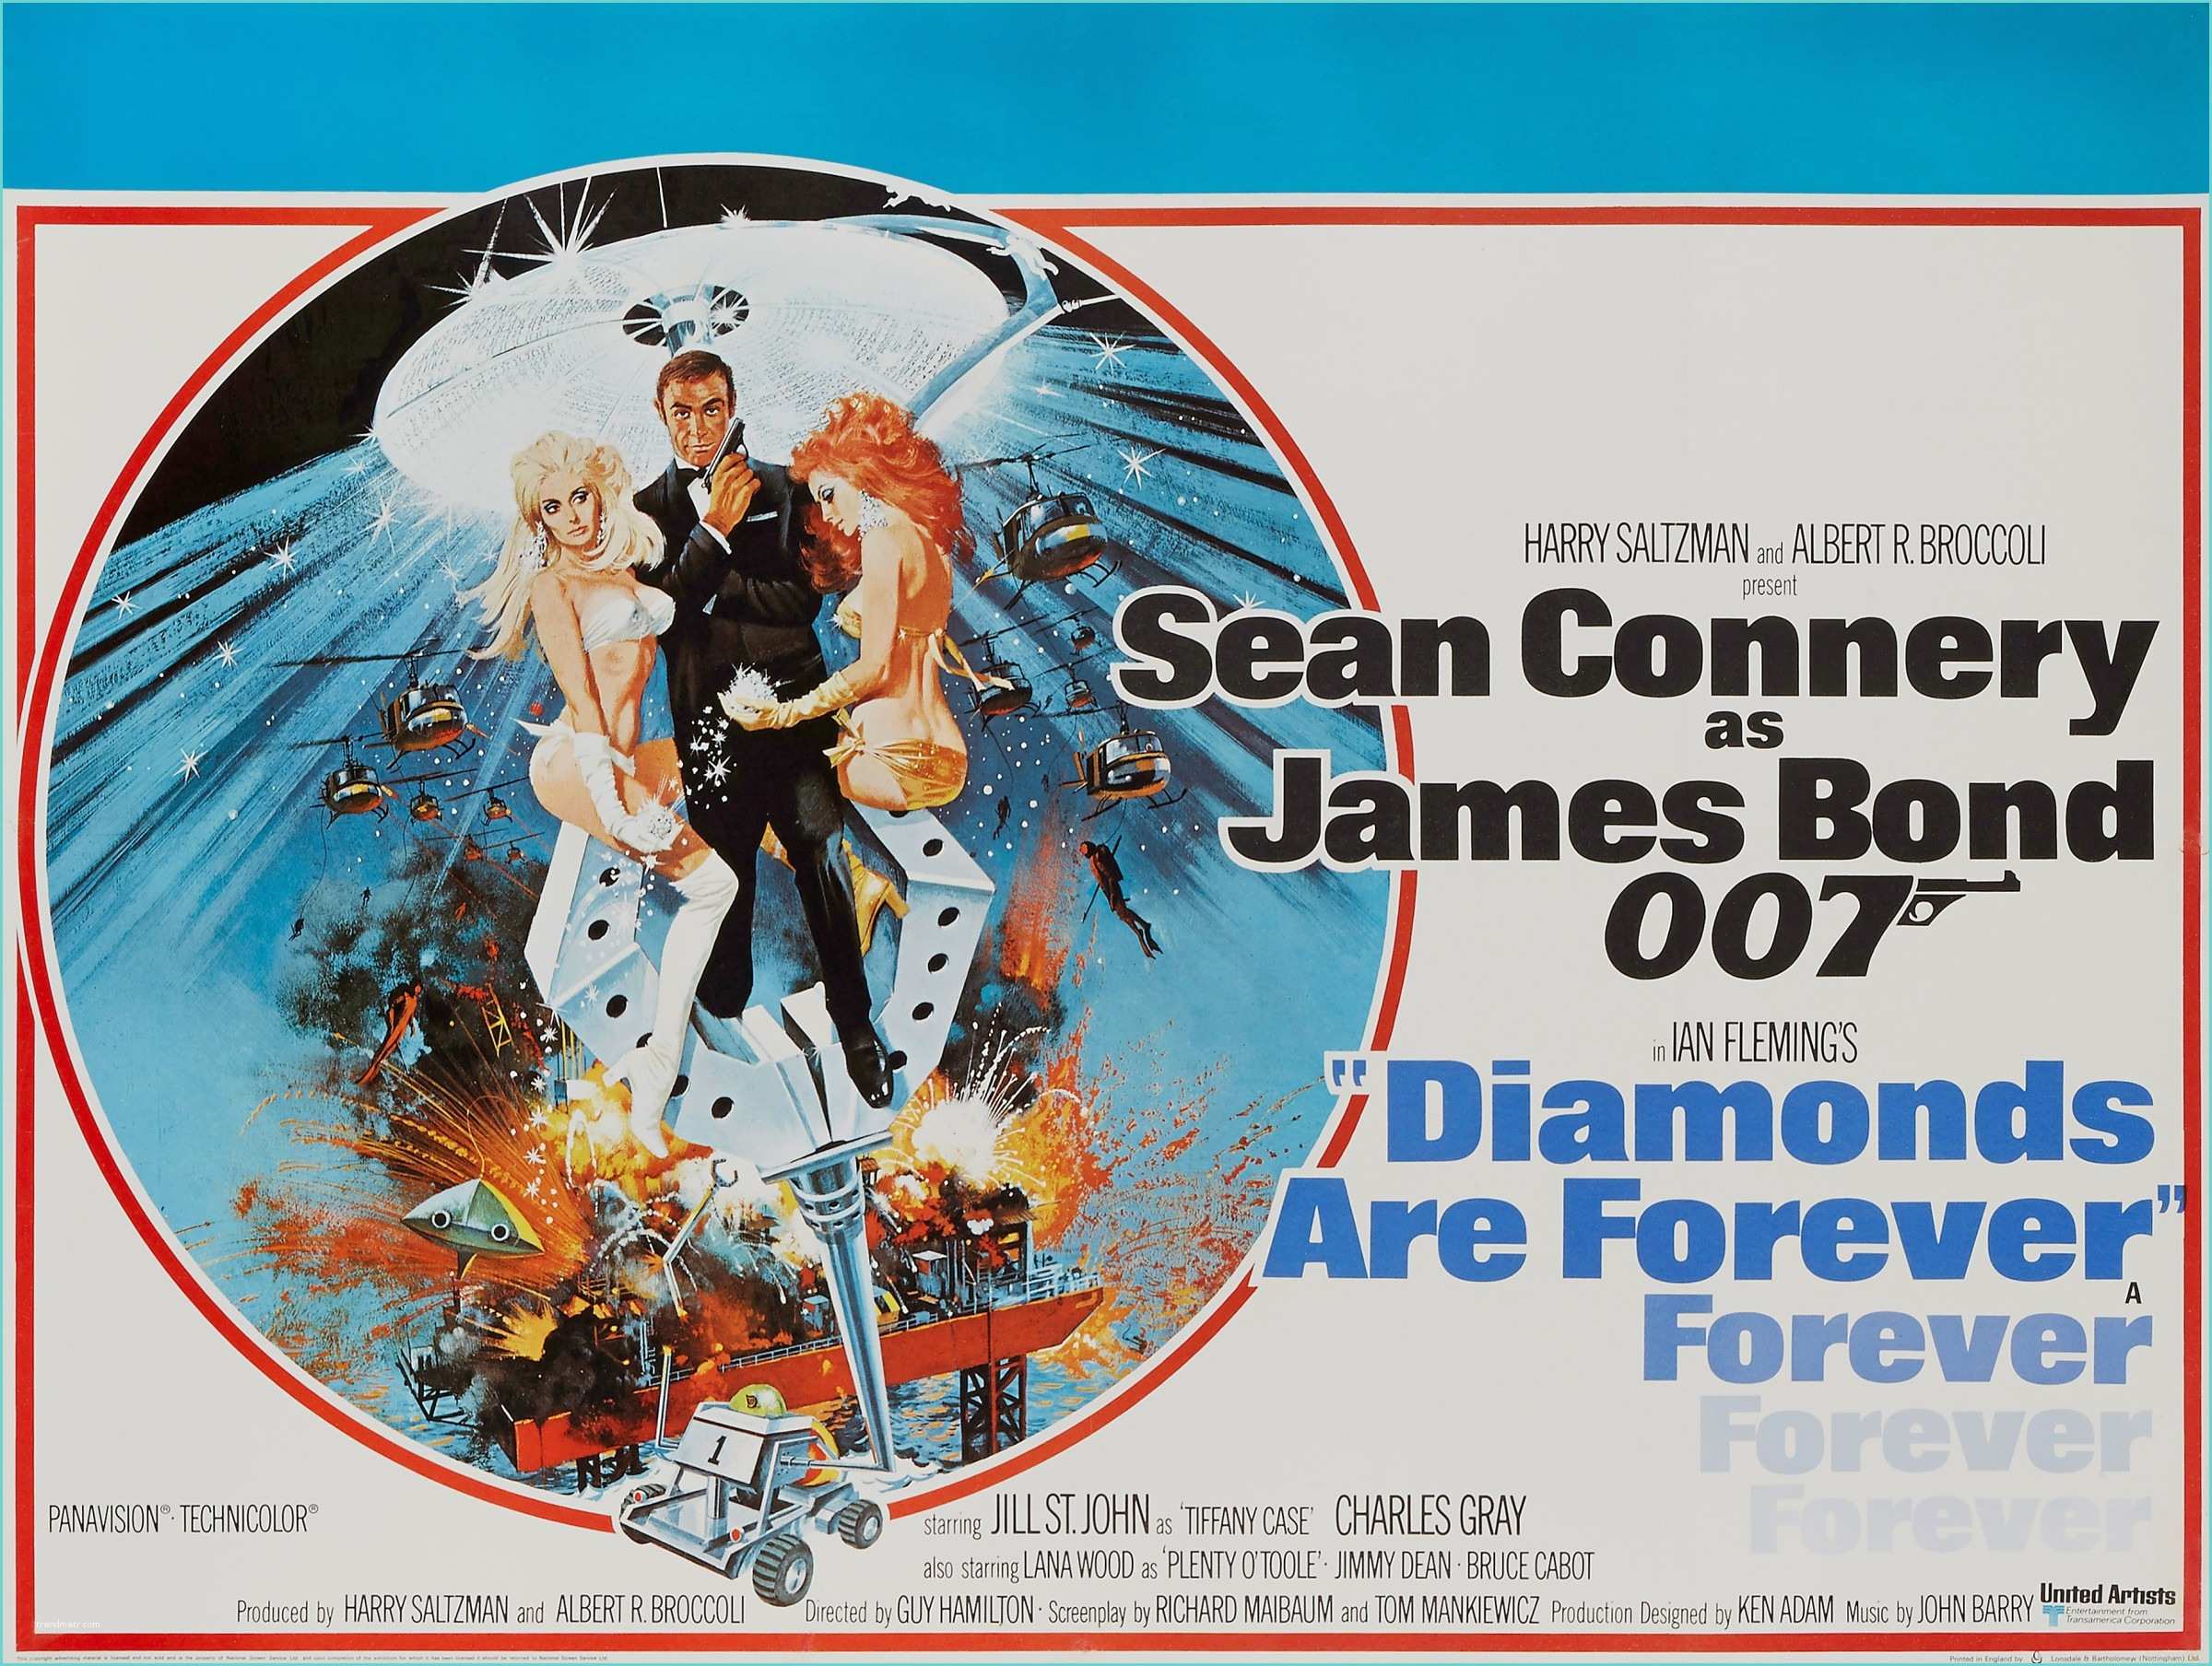 Allposters Return Policy Robert Mcginnis Diamonds are forever 1971